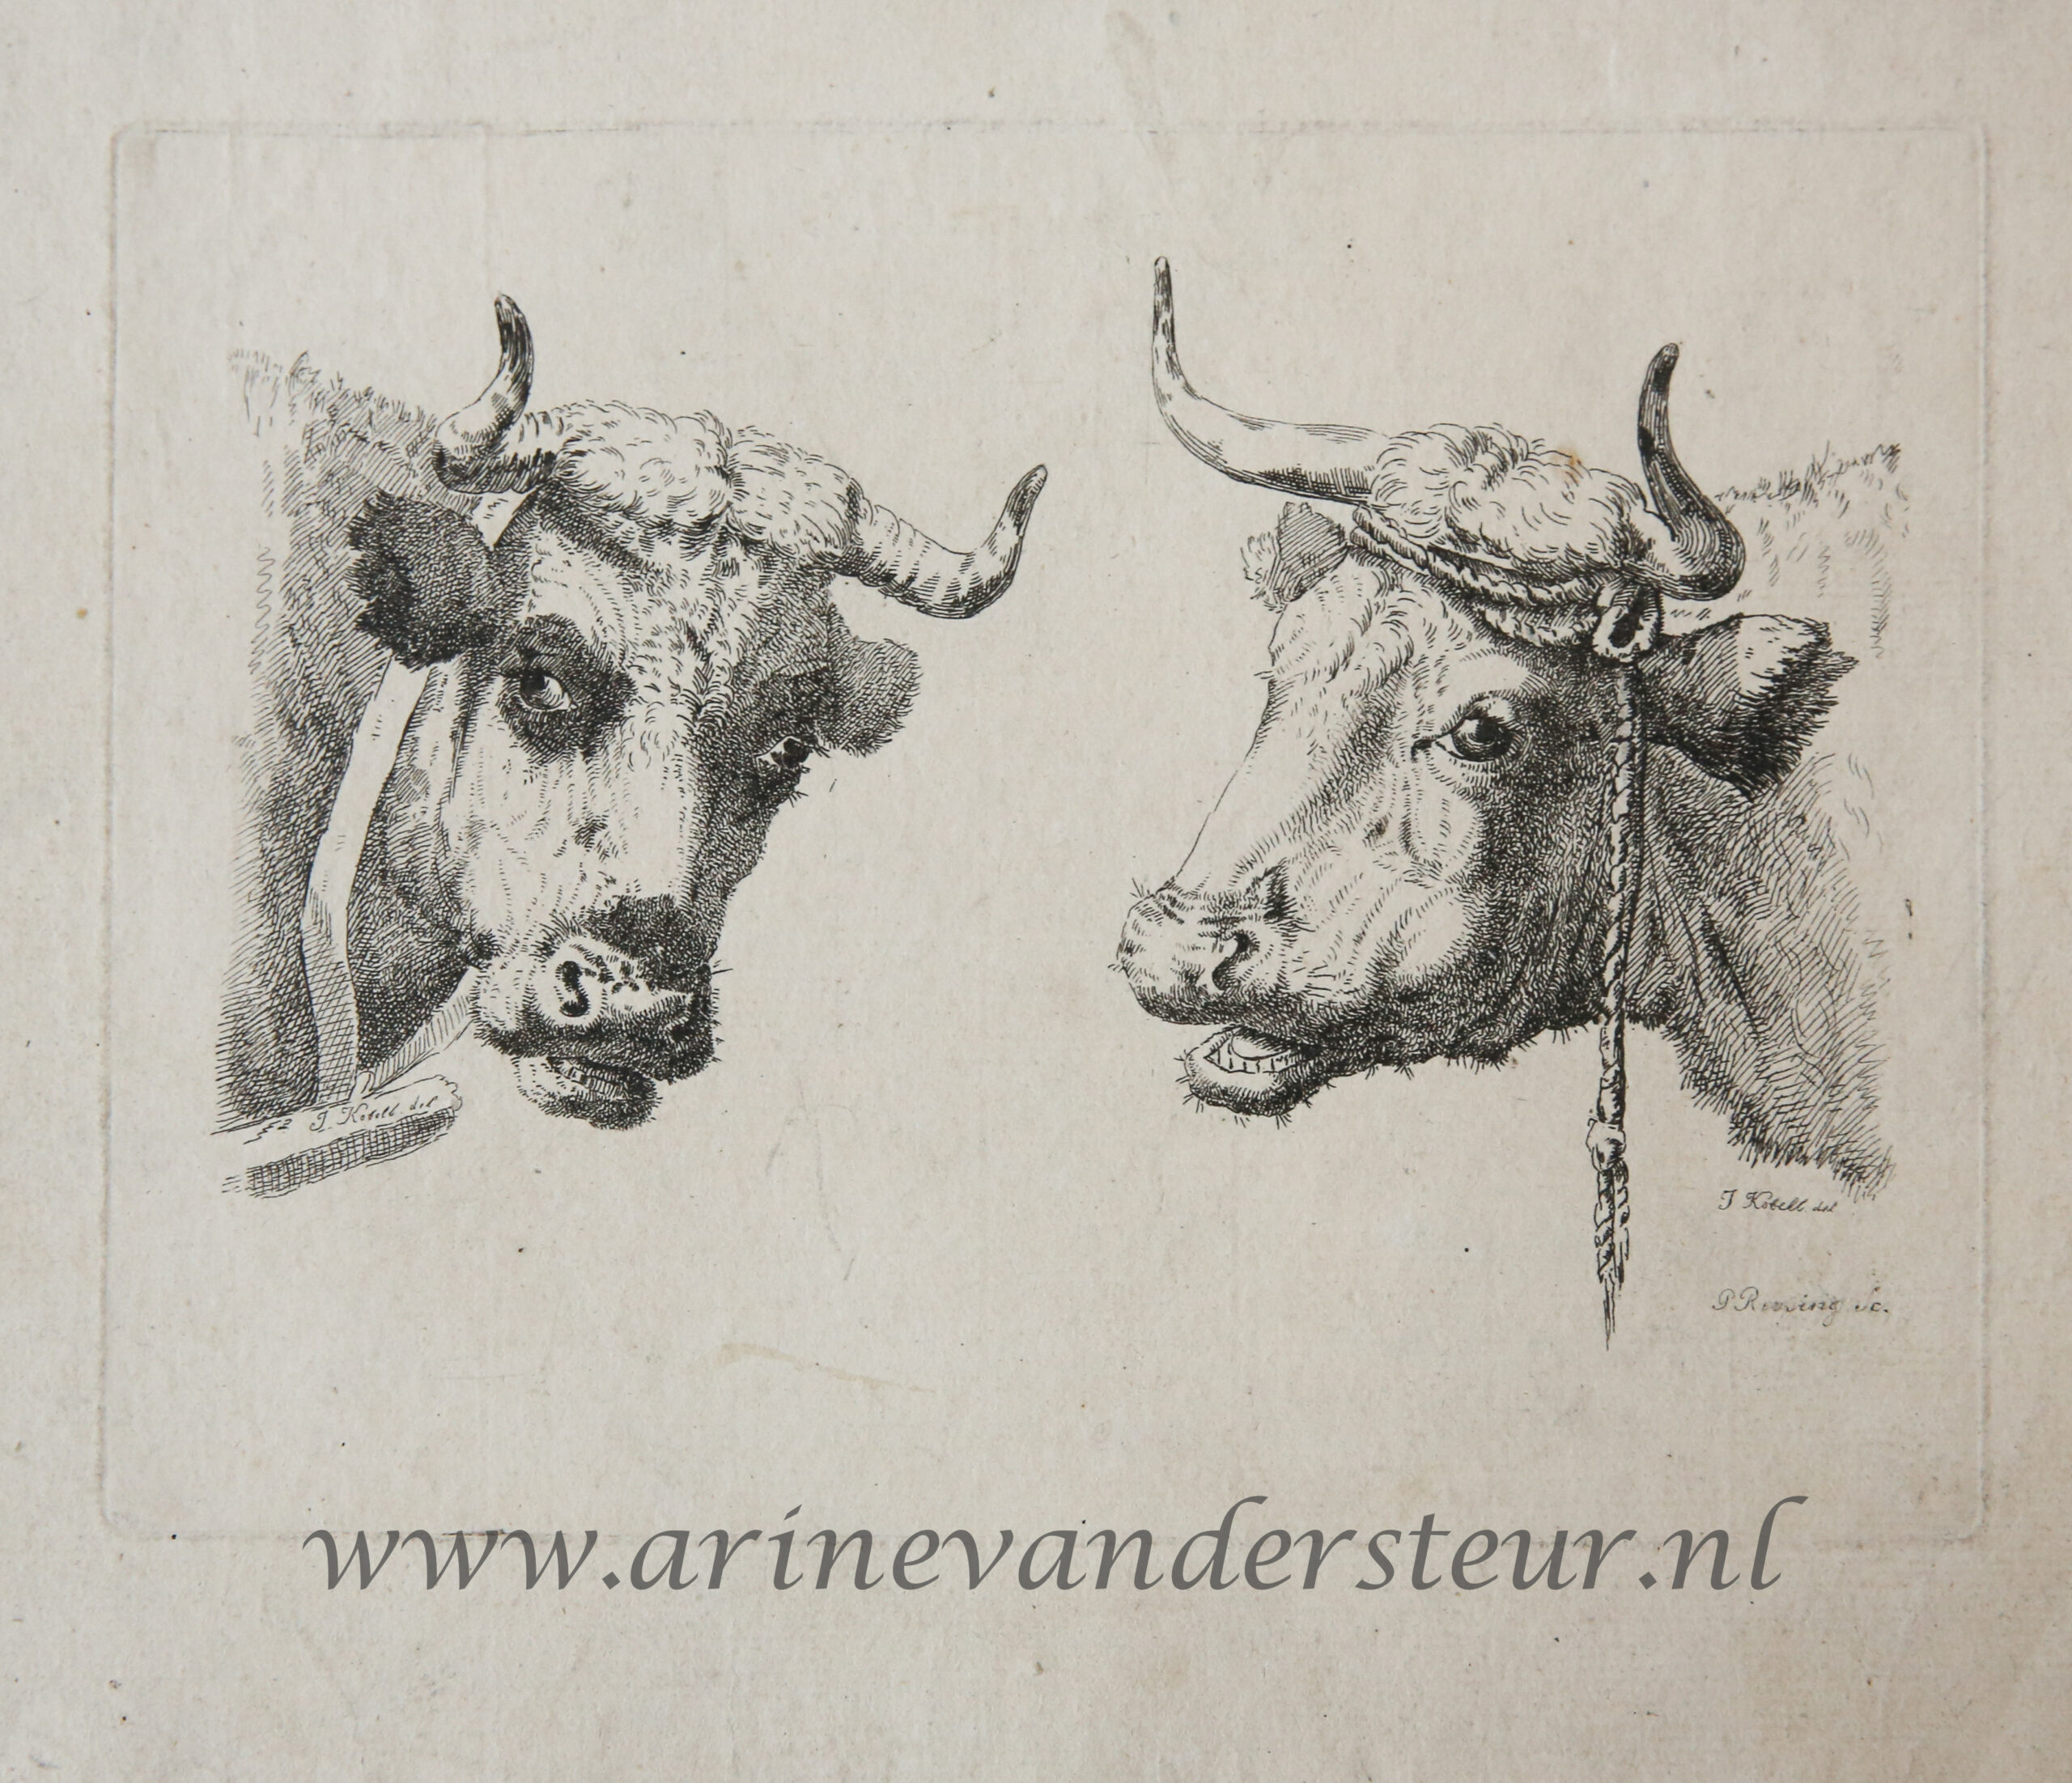 [Original etching, ets] P. Roosing after J. Kobell II. Two cow heads, published 1800-1850.